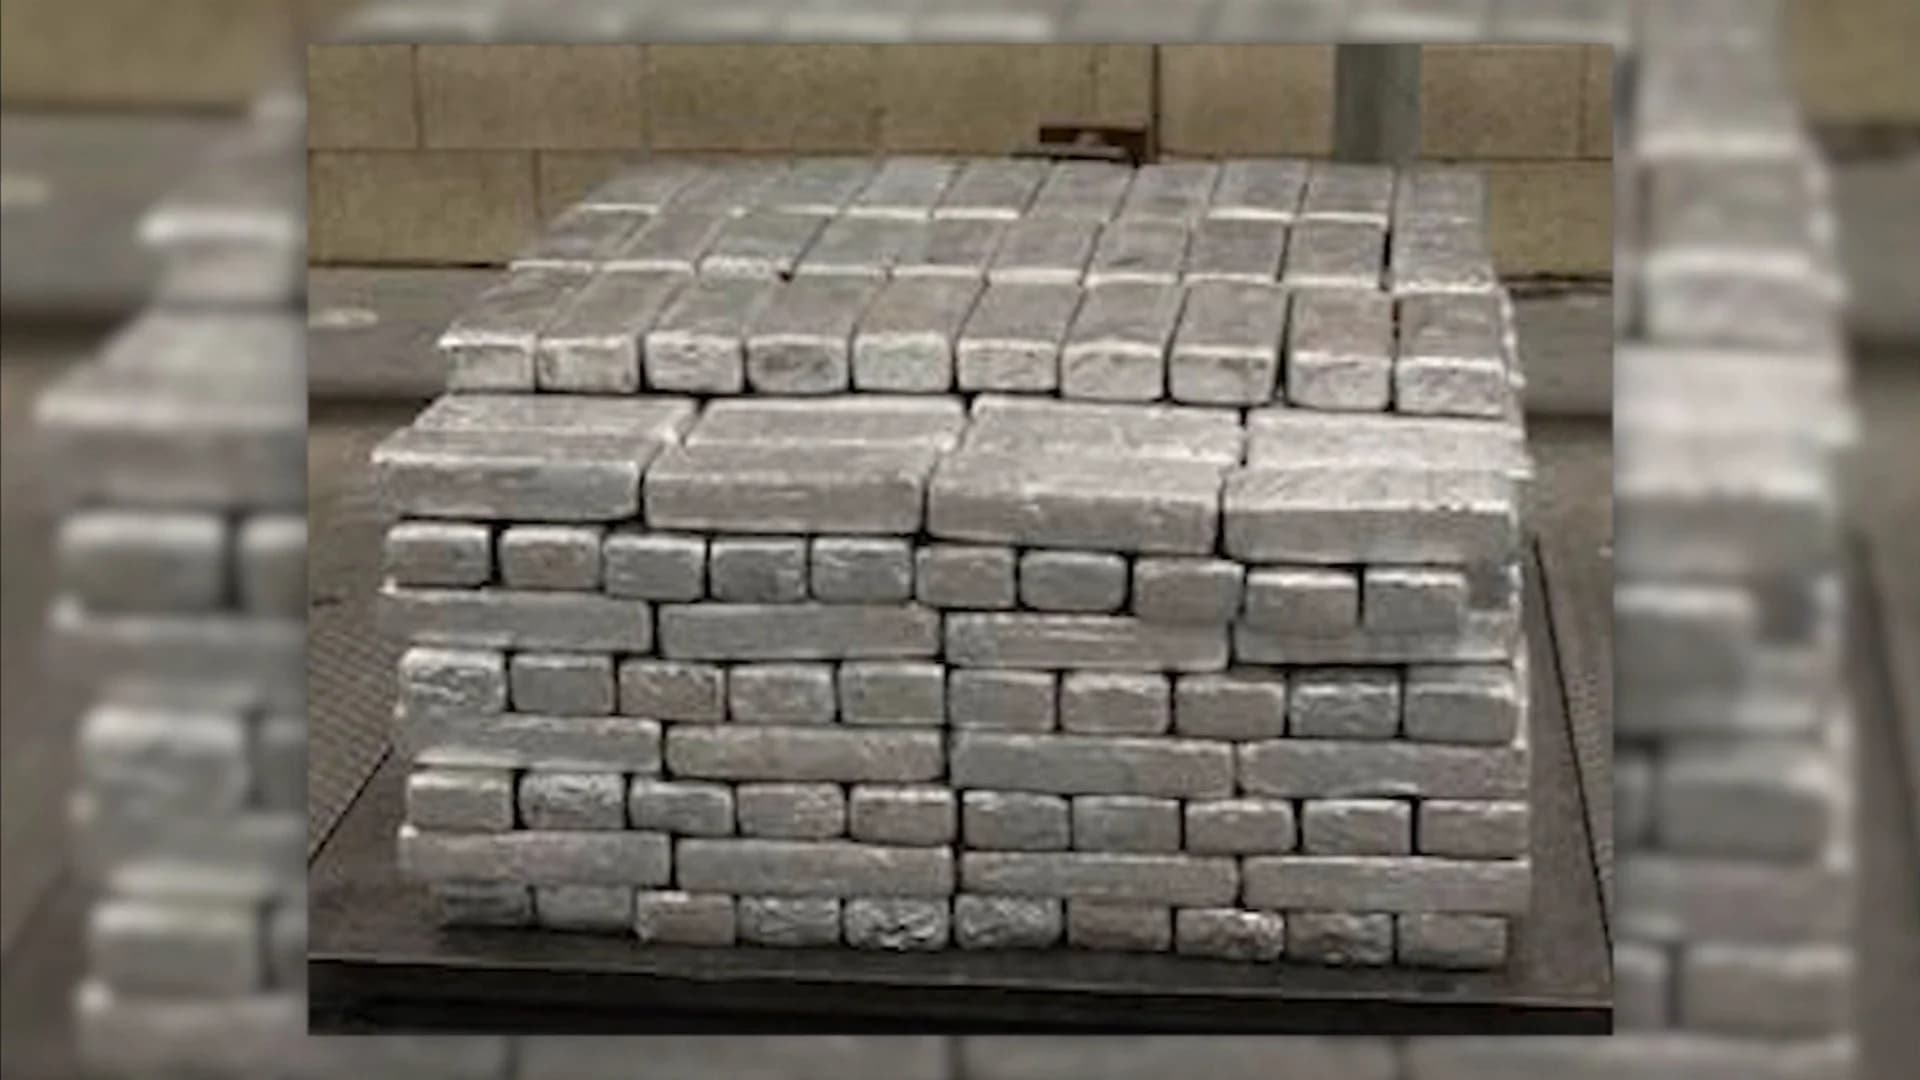 Customs intercepts over $12M in meth at border crossing; Mexican citizen arrested